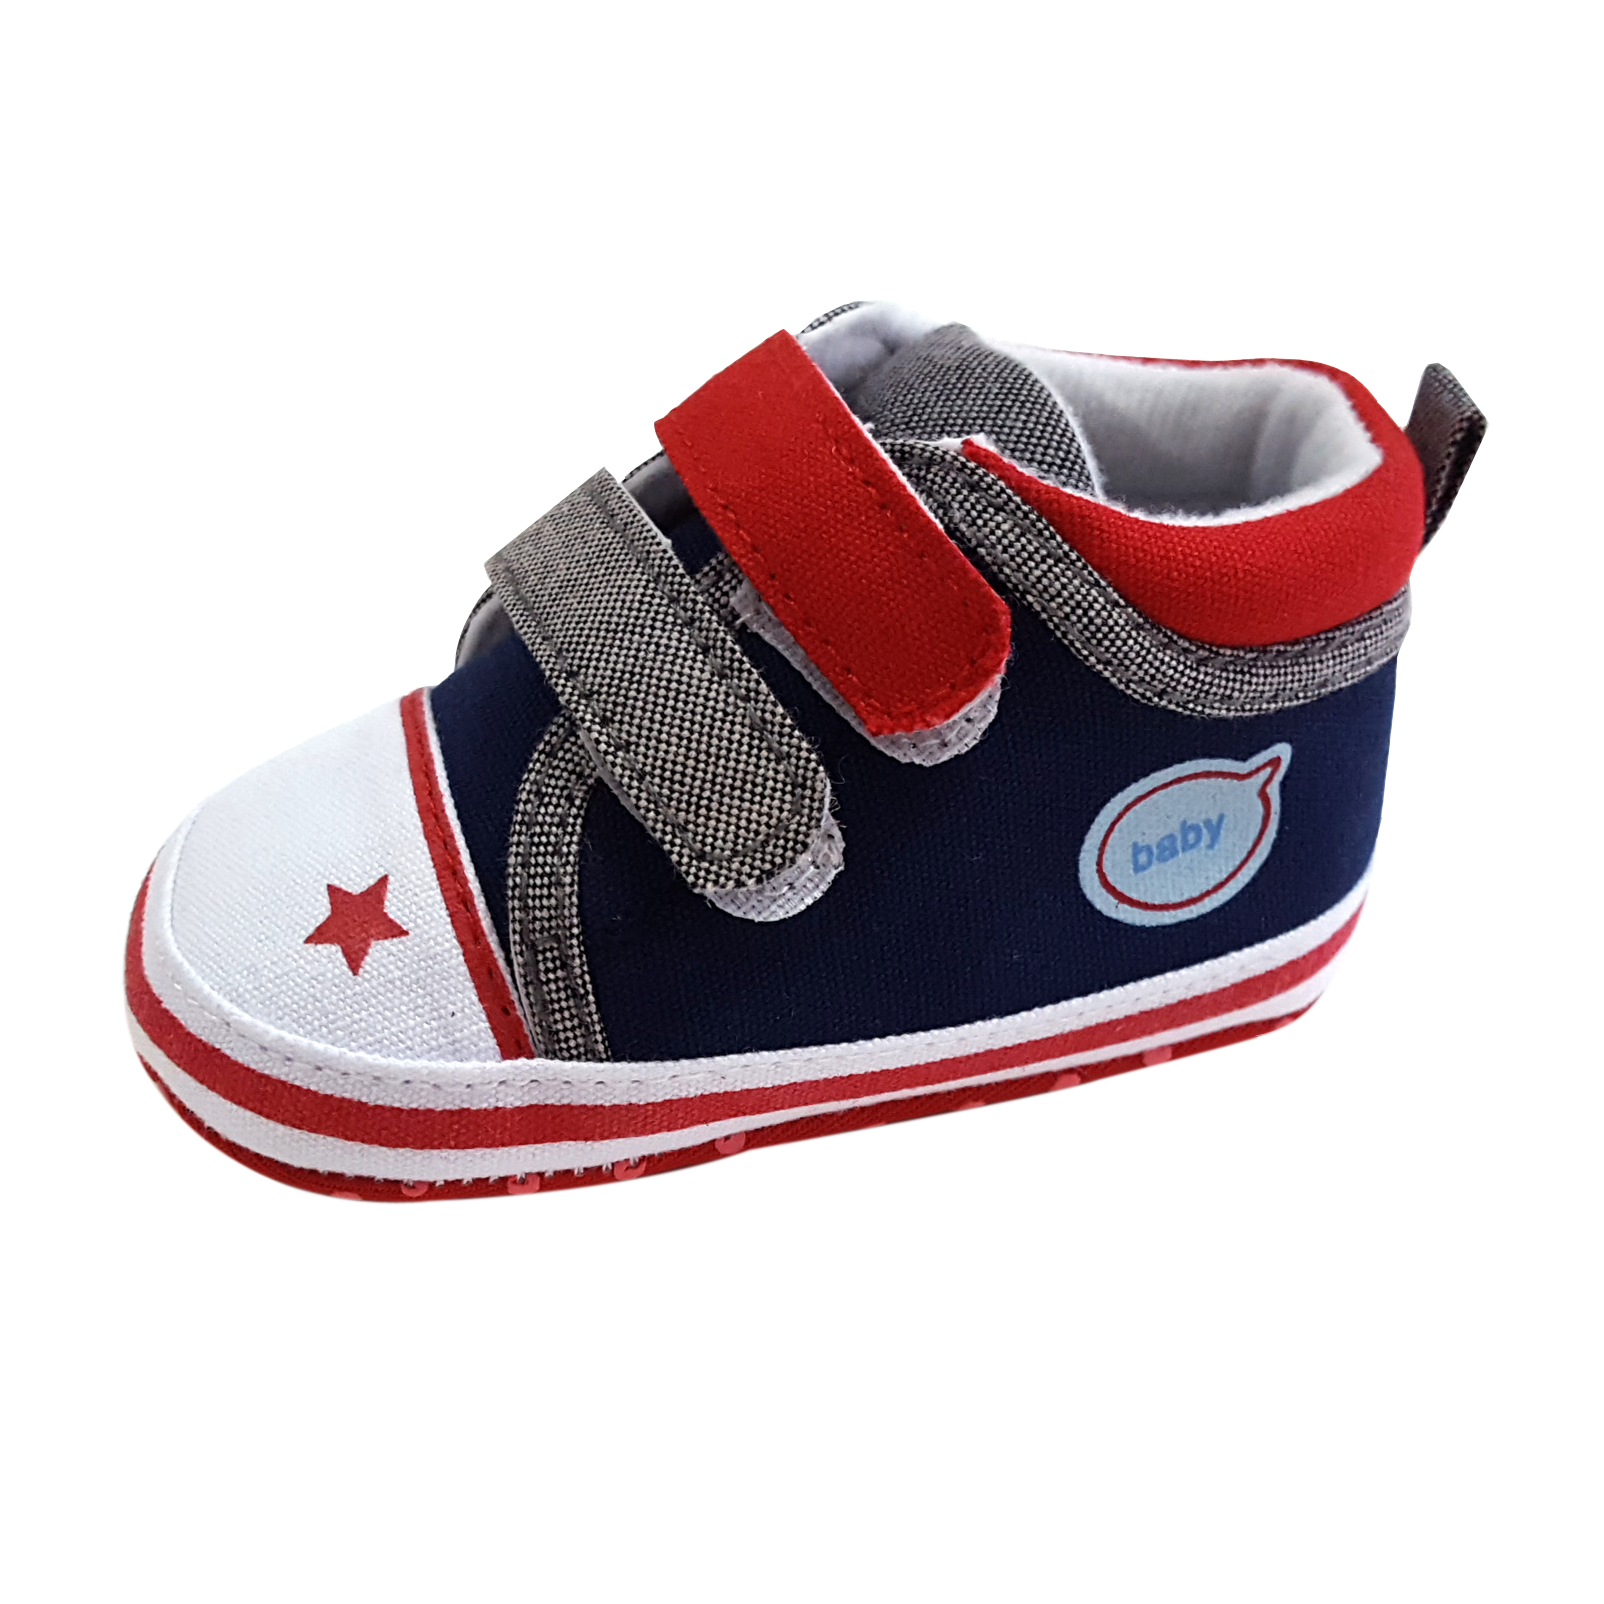 Levi (Pre-Walker Shoes) -  B102 Navy/Red